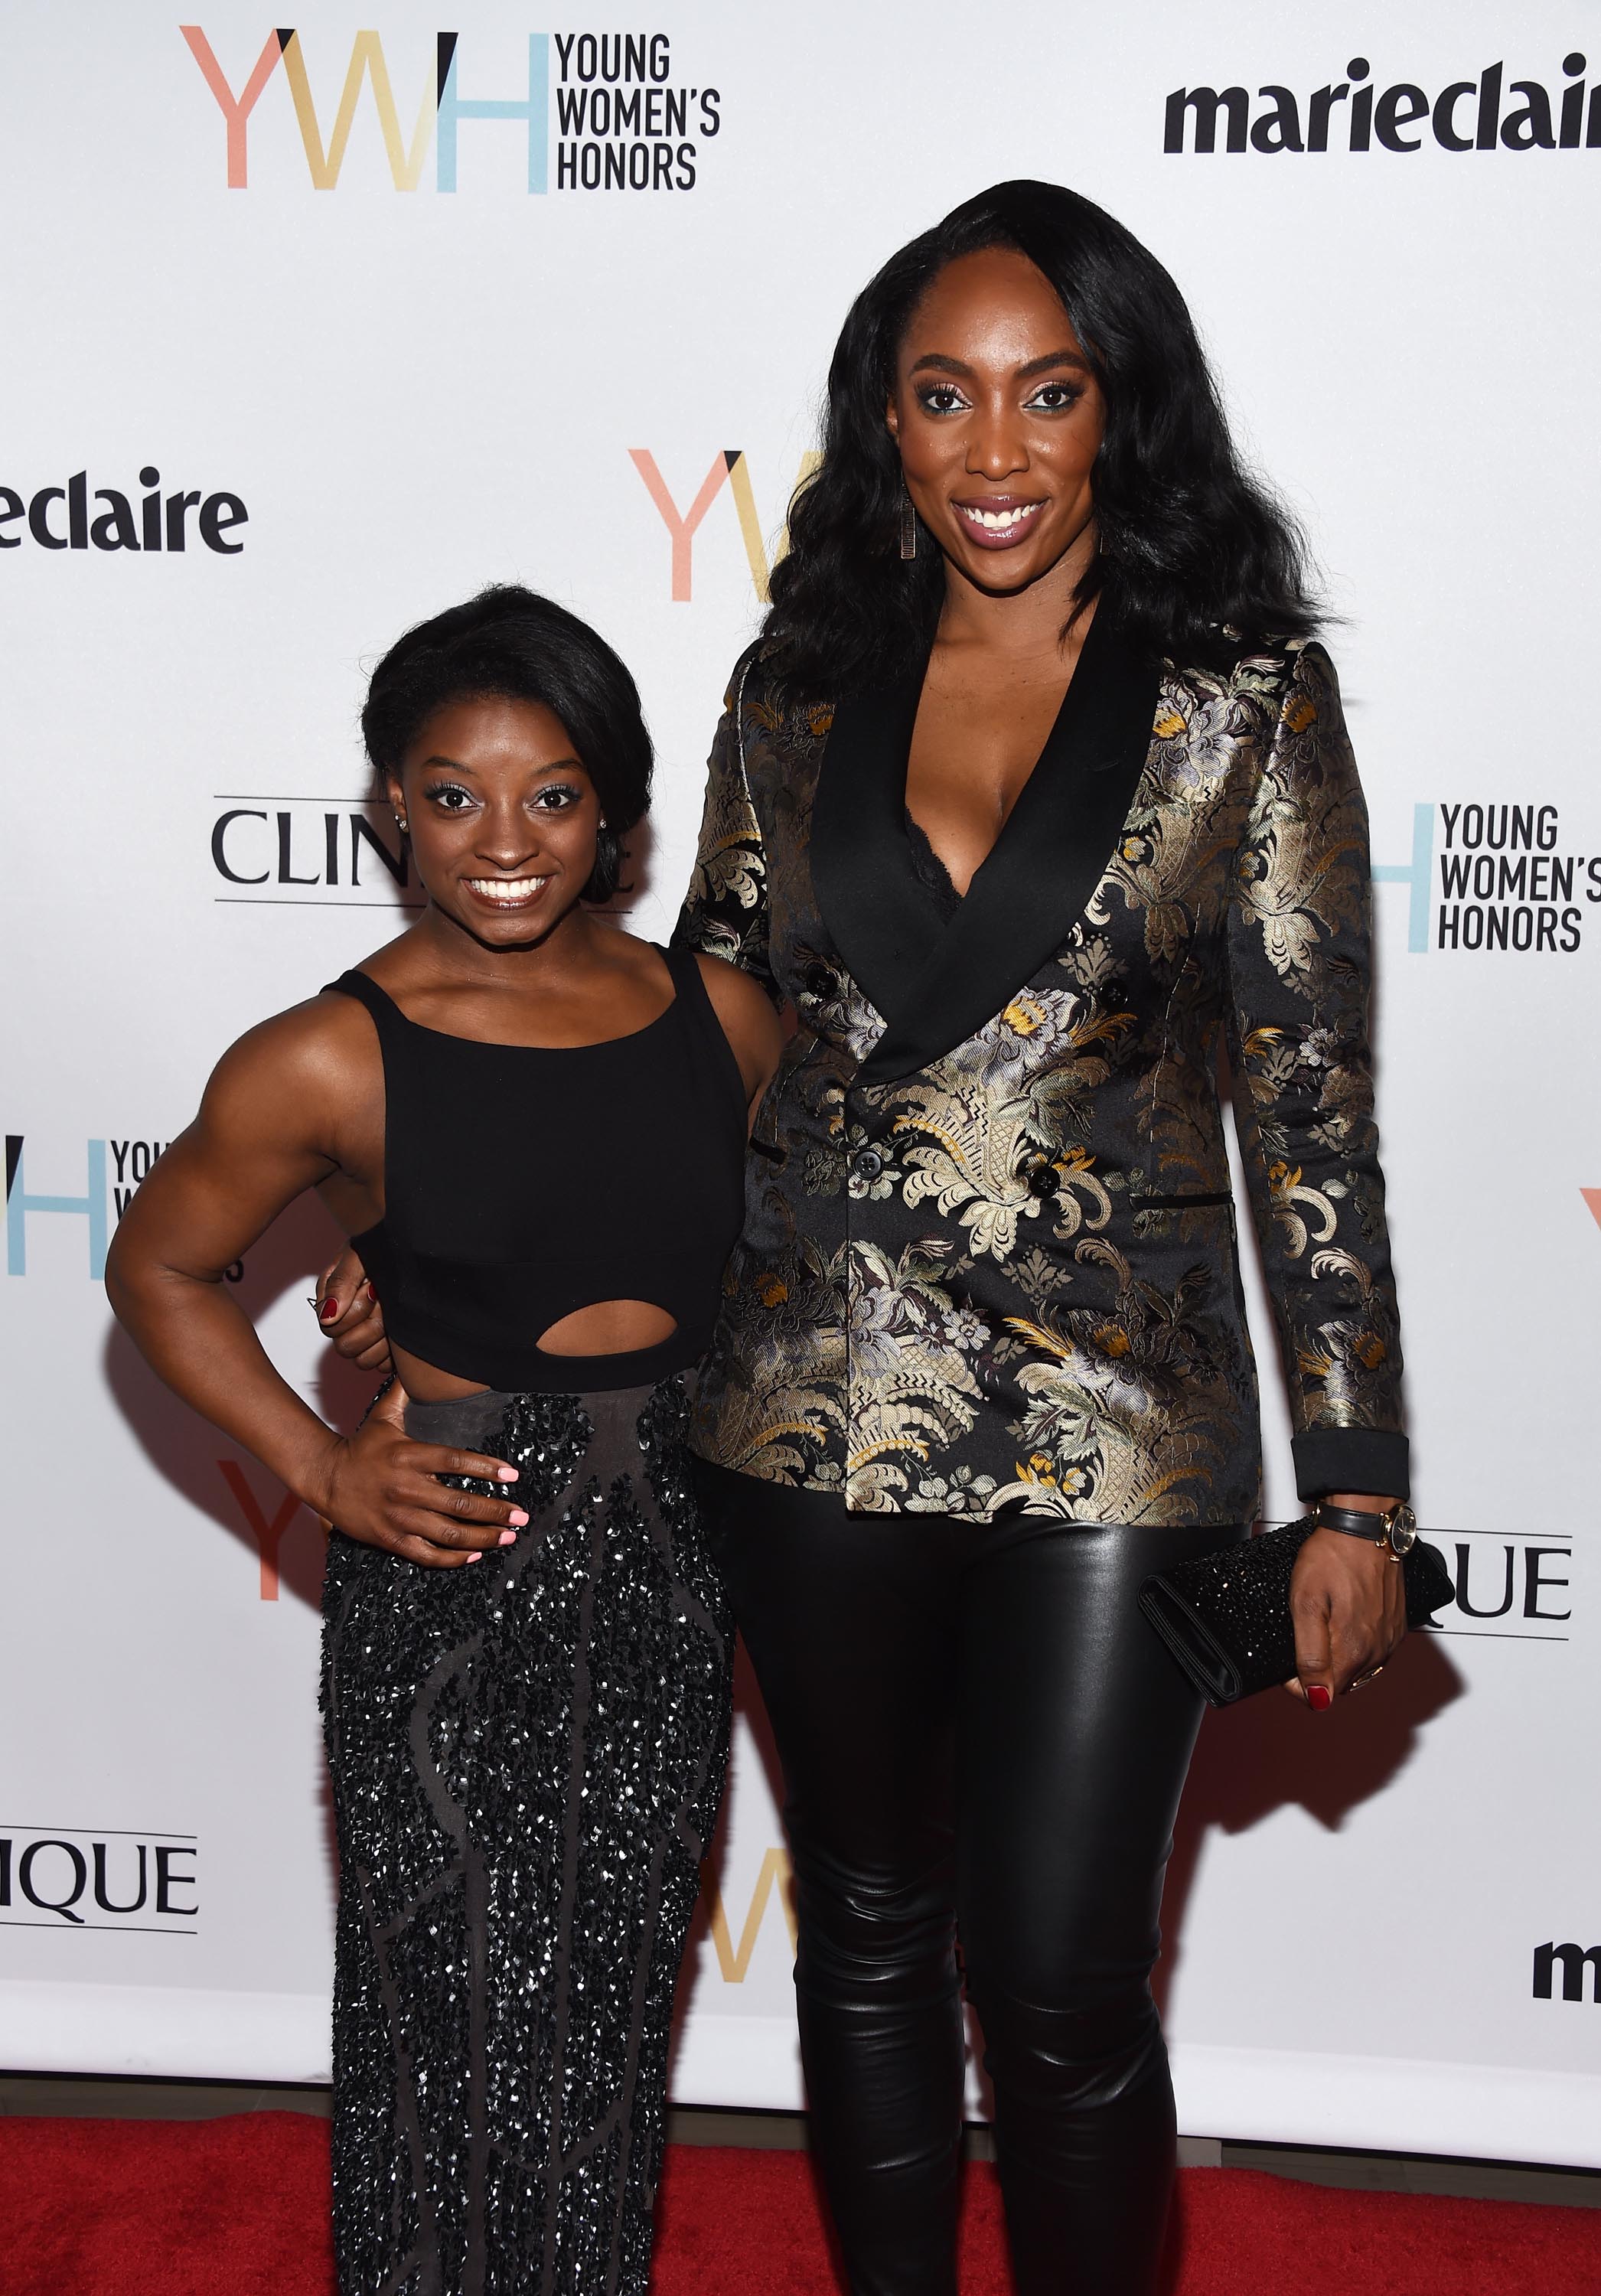 Jessica Matthews arrives at the 1st Annual Marie Claire Young Women’s Honors